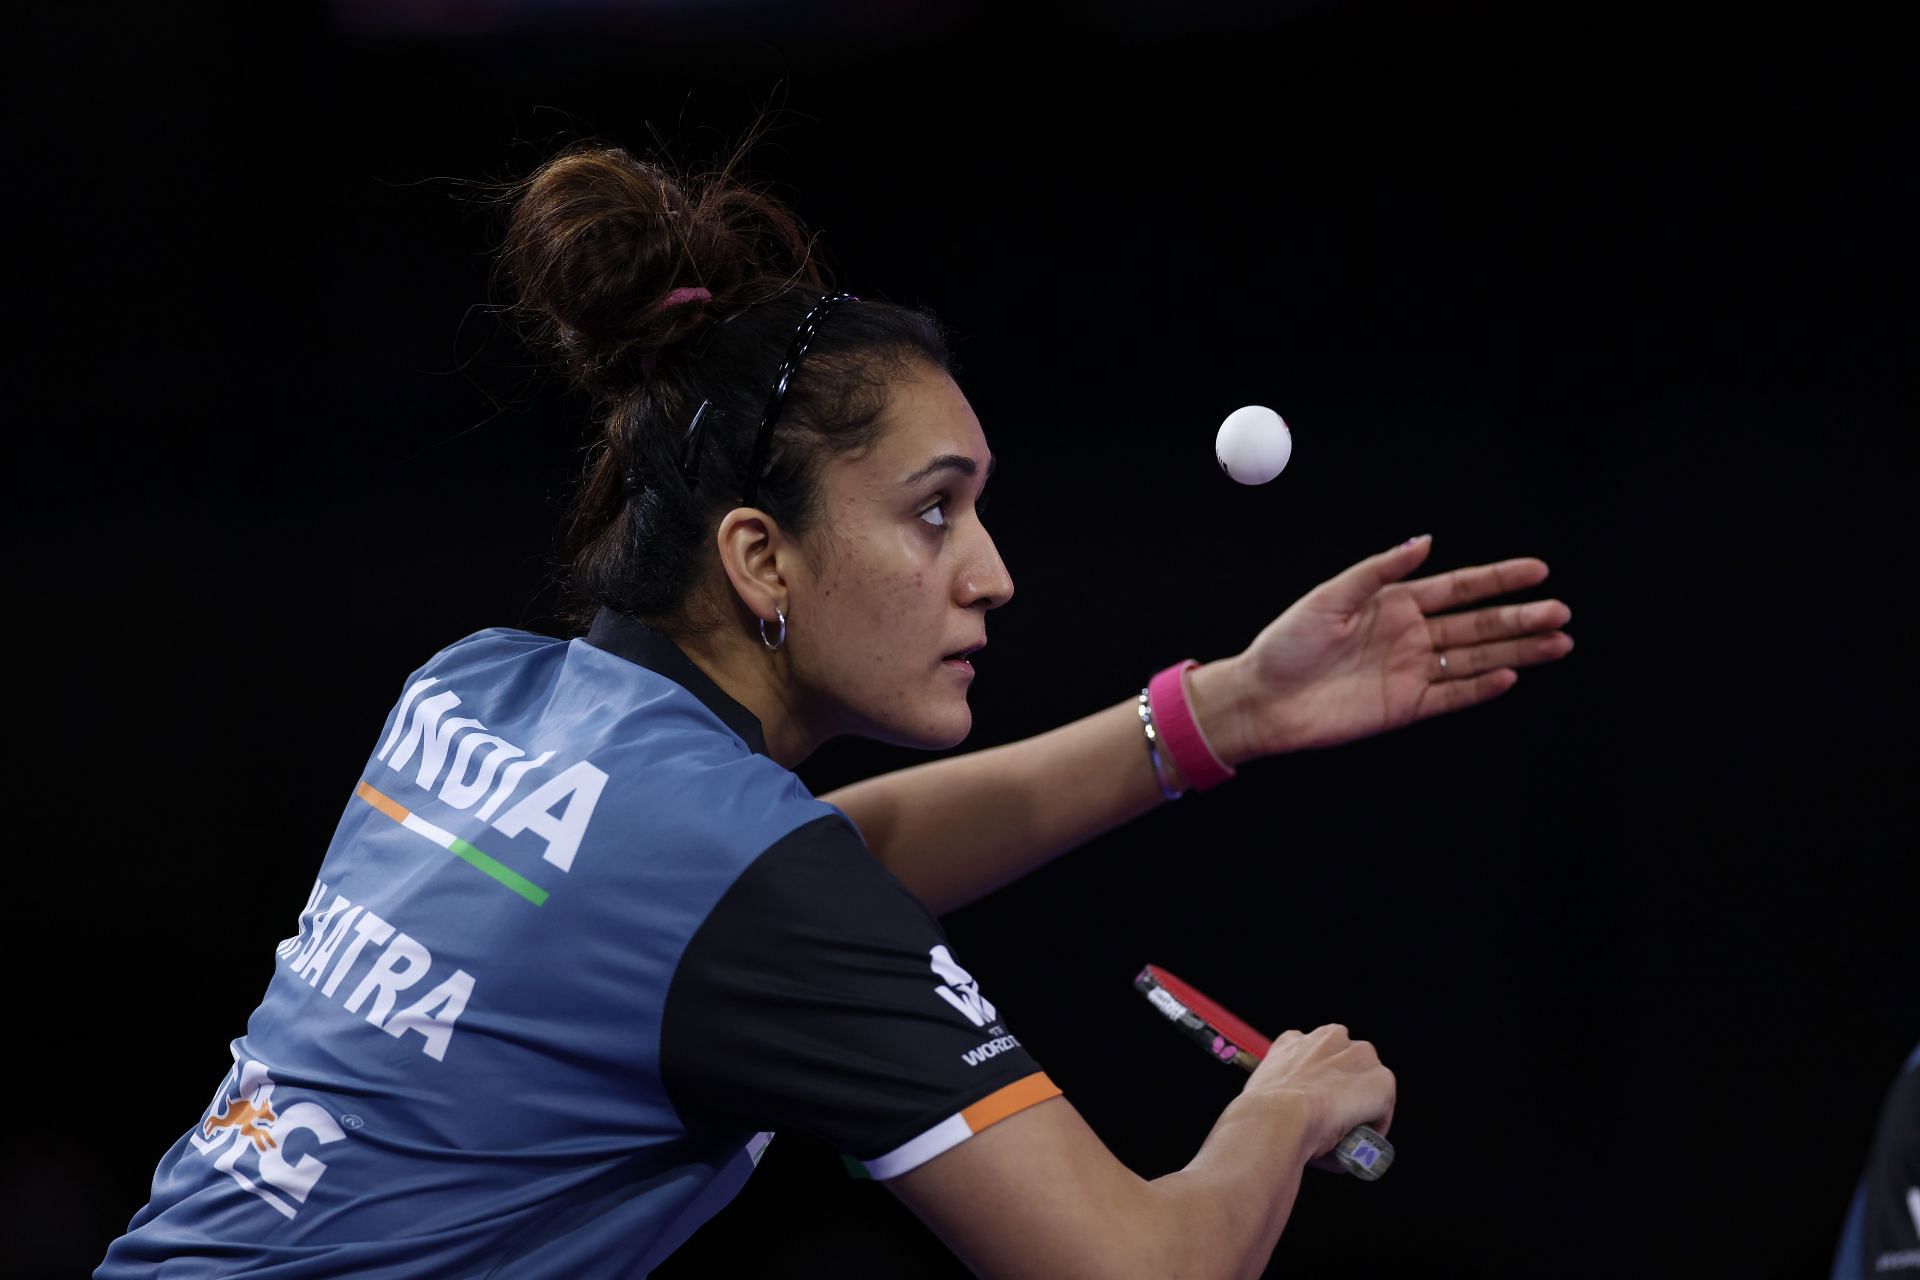 Indian table tennis player Manika Batra in action. (PC: Getty Images)